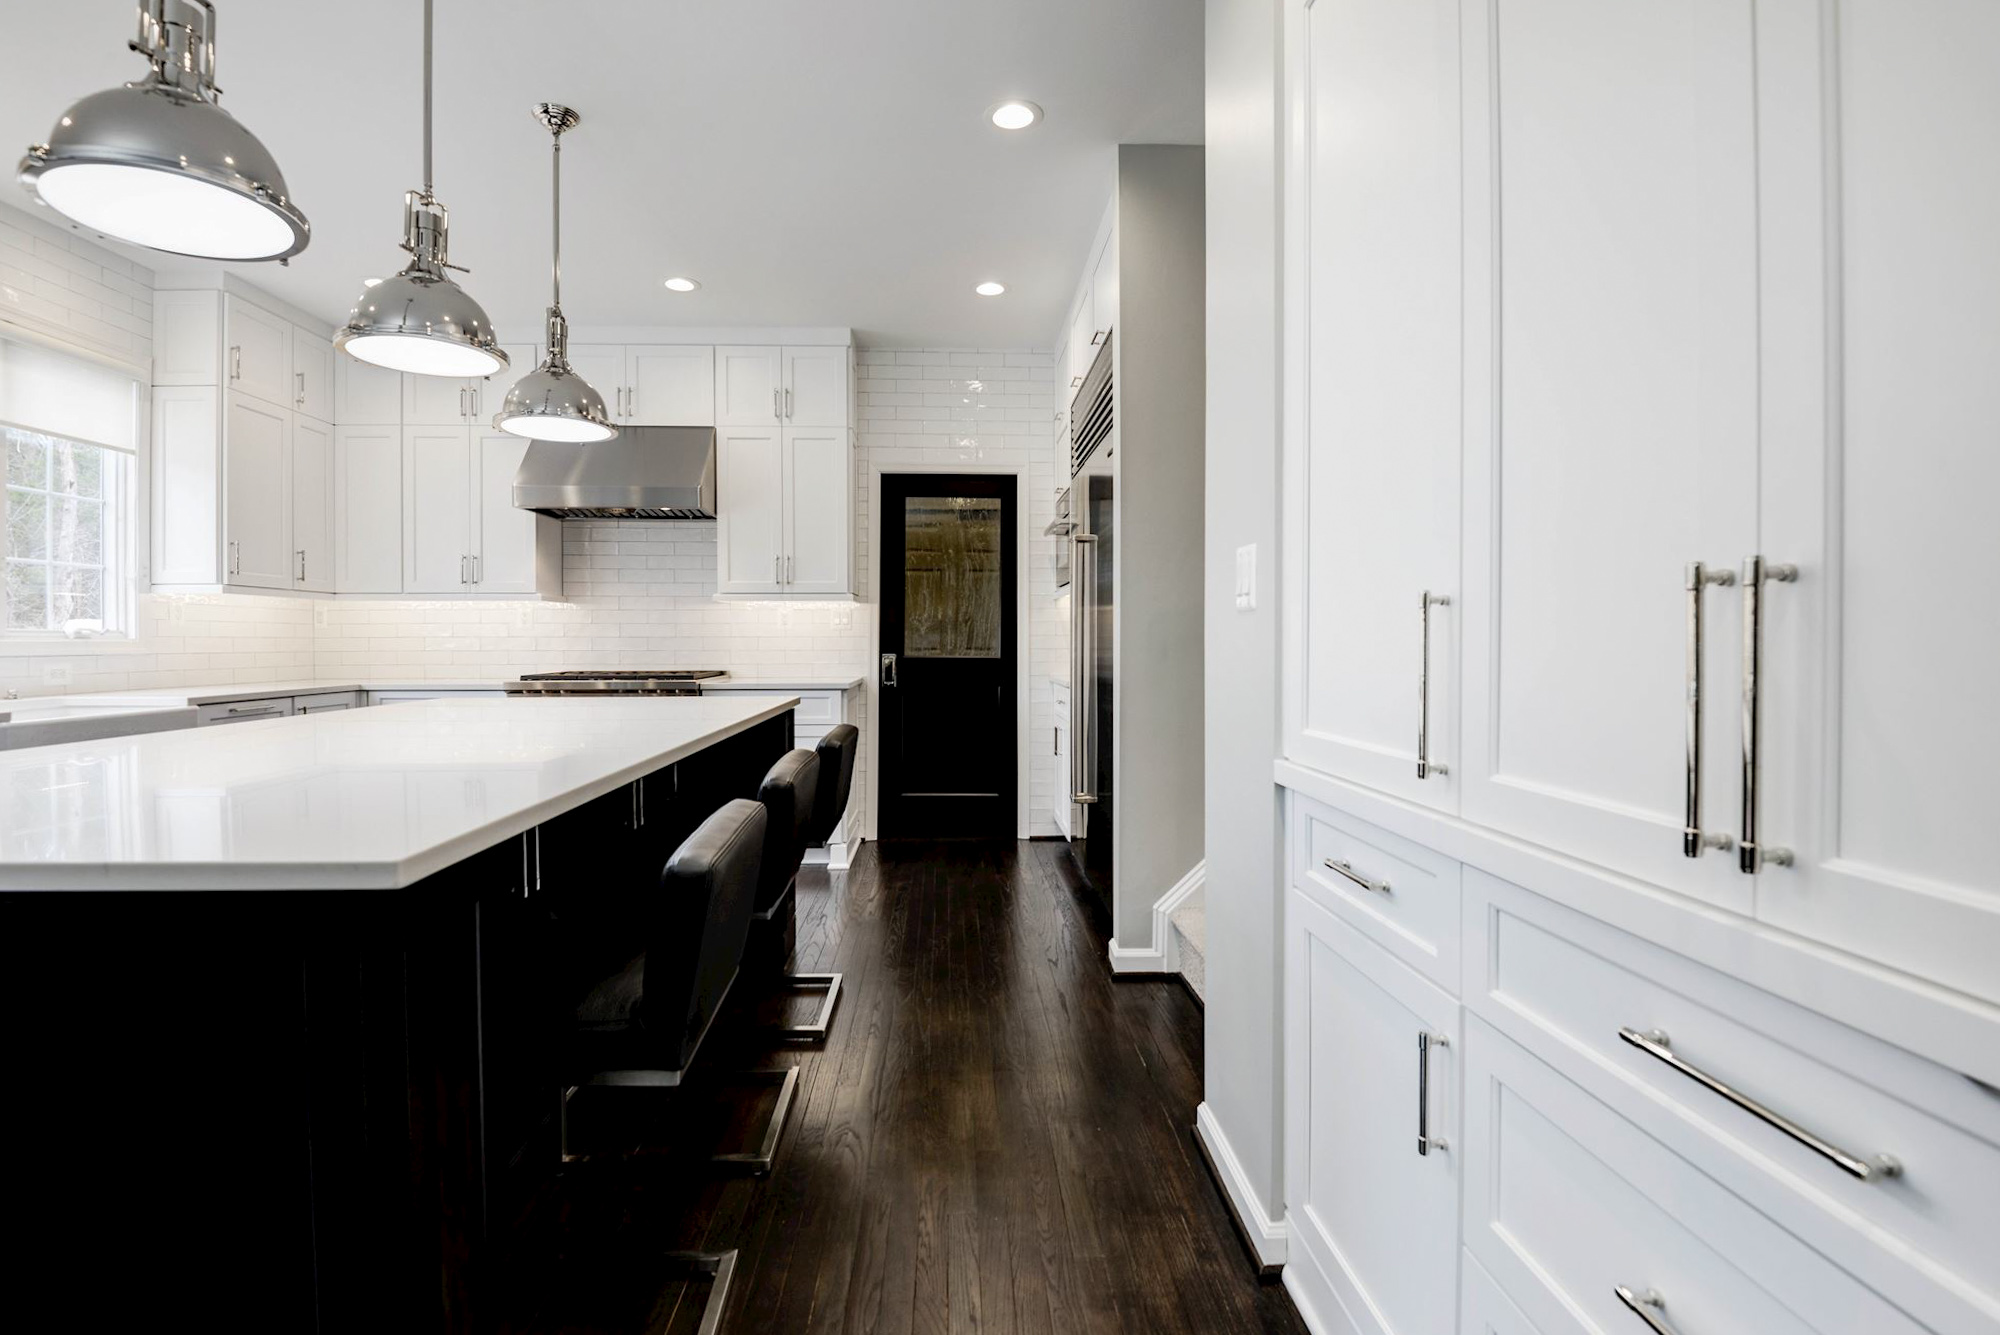 White cabinets with silver handle fixtures